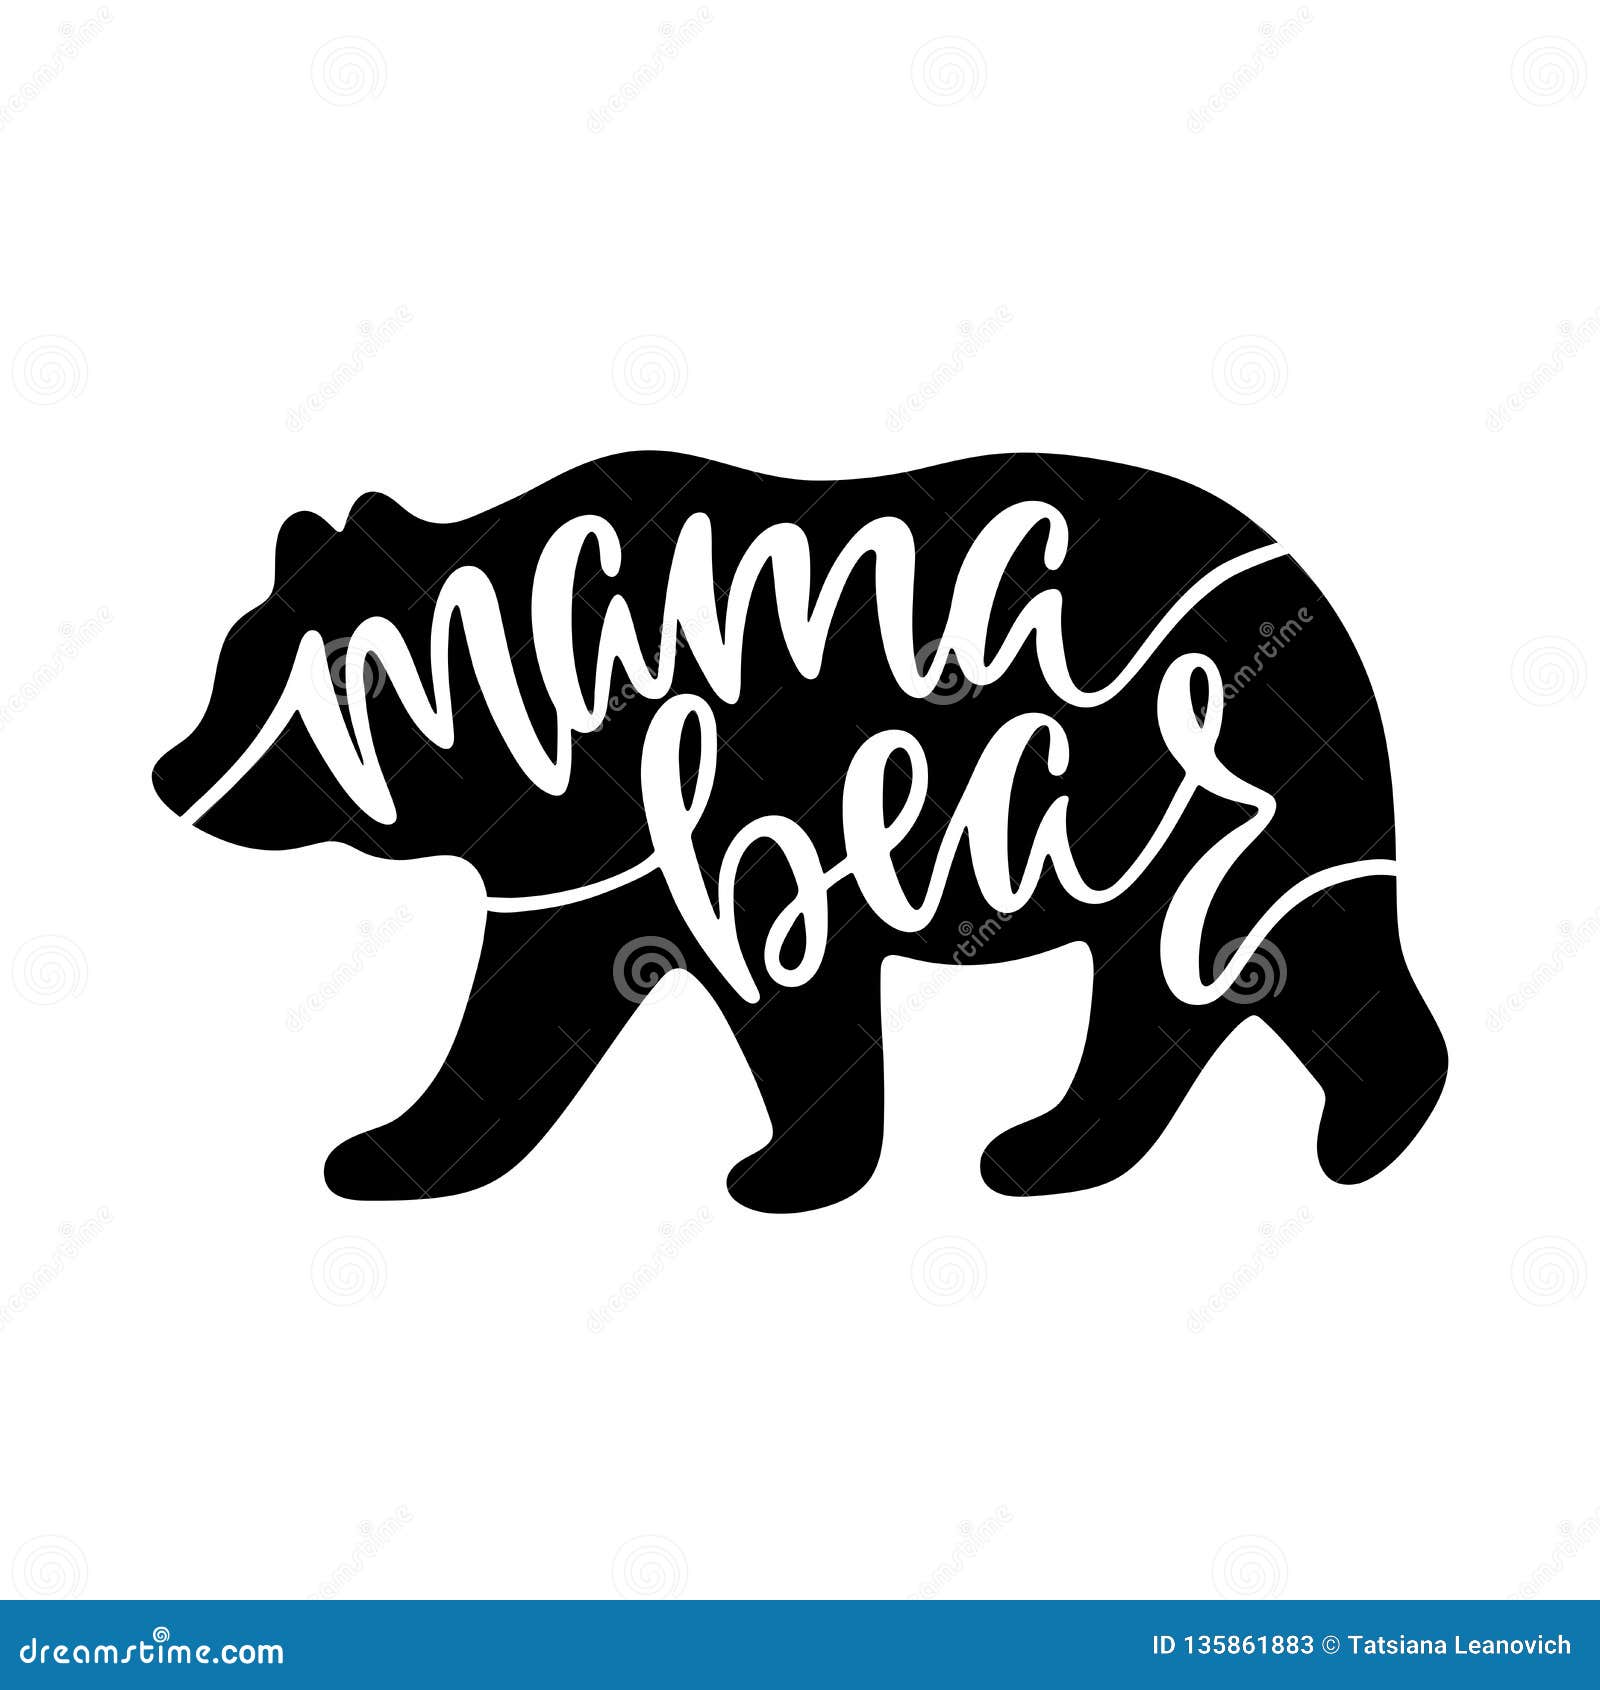 mama bear. inspirational quote with bear silhouette. hand writing calligraphy phrase.